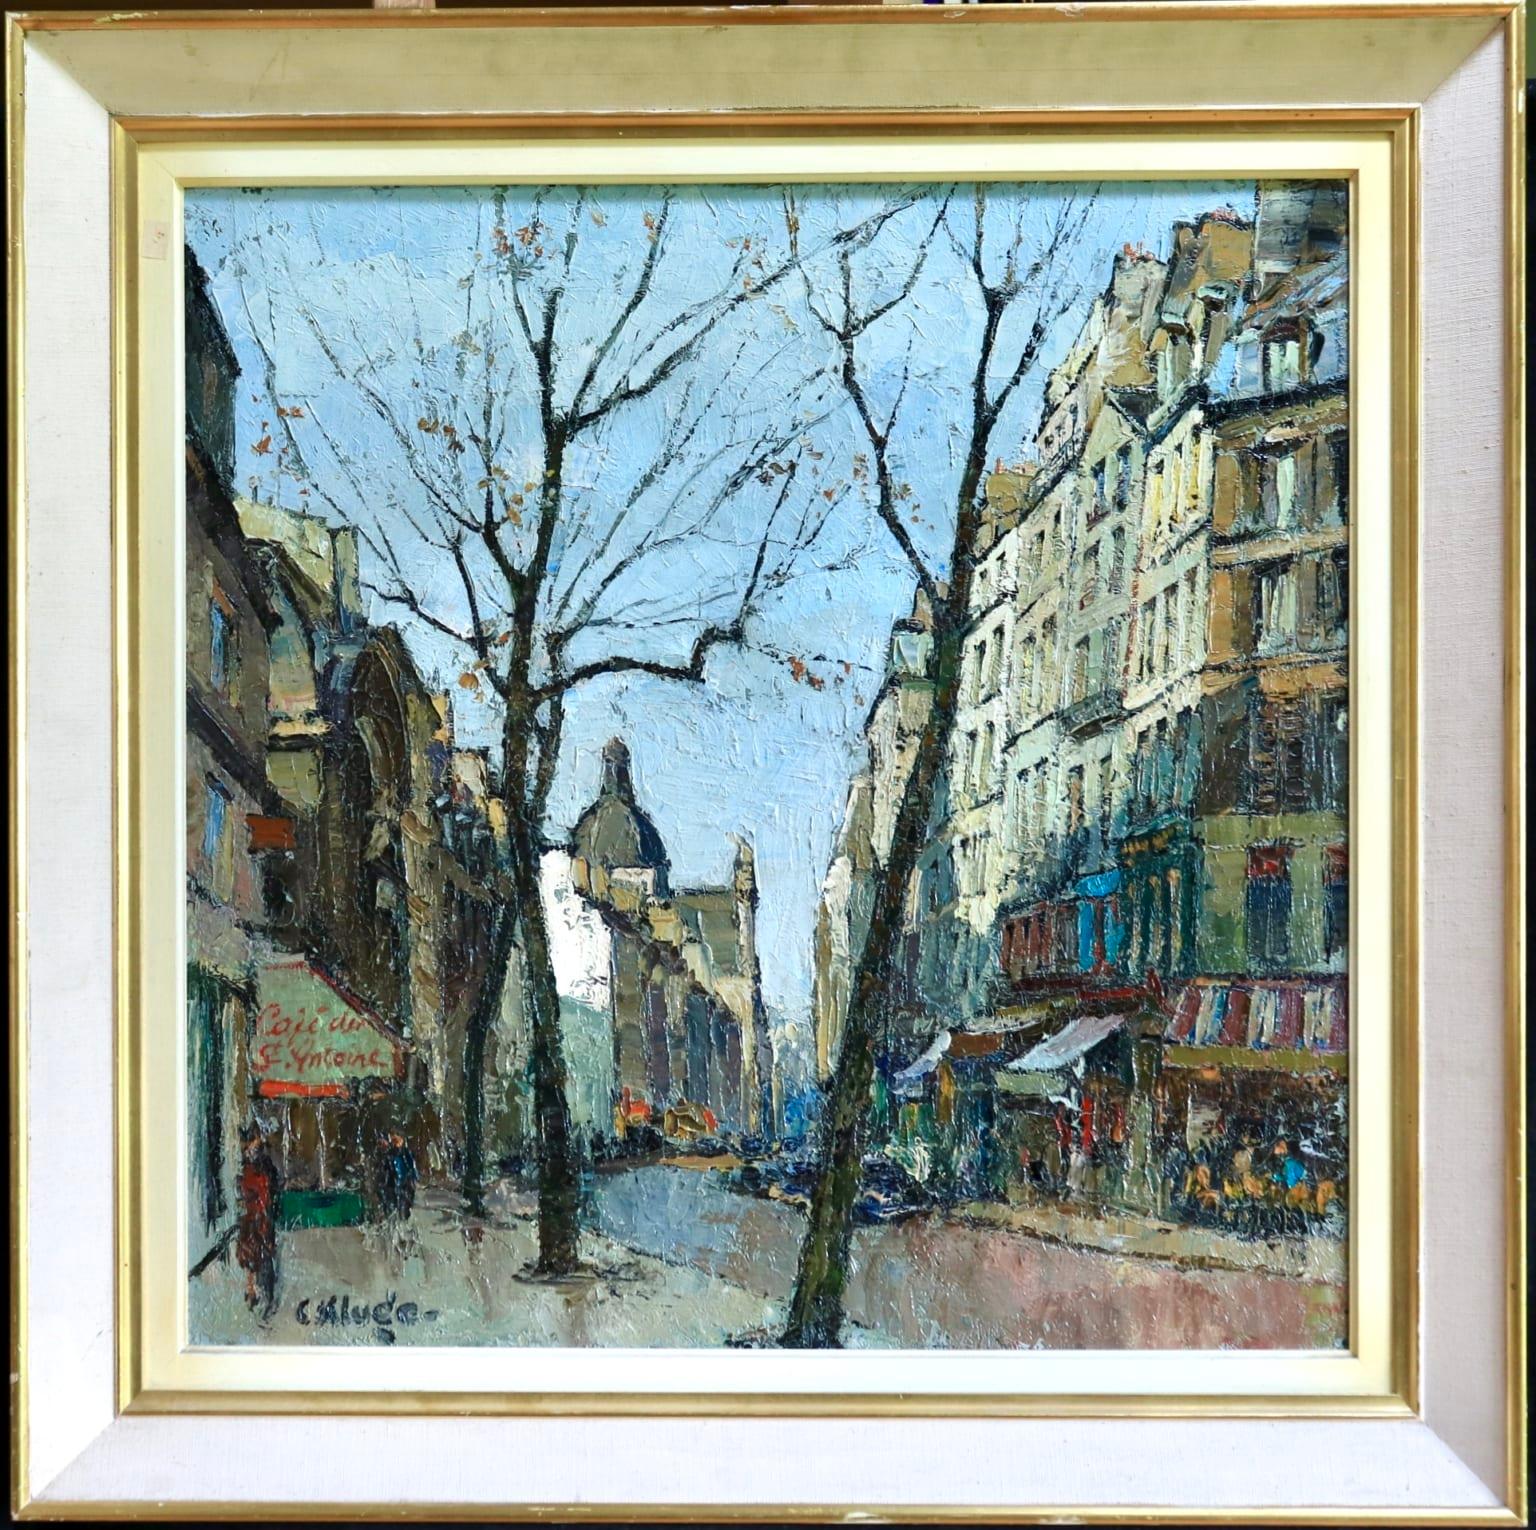 A wonderful oil on canvas by Latvian post impressionist painter Constantin Kluge depicting a view of a Rue Saint-Antoine on a crisp autumn day in Paris. Signed lower left.

Dimensions:
Framed: 36